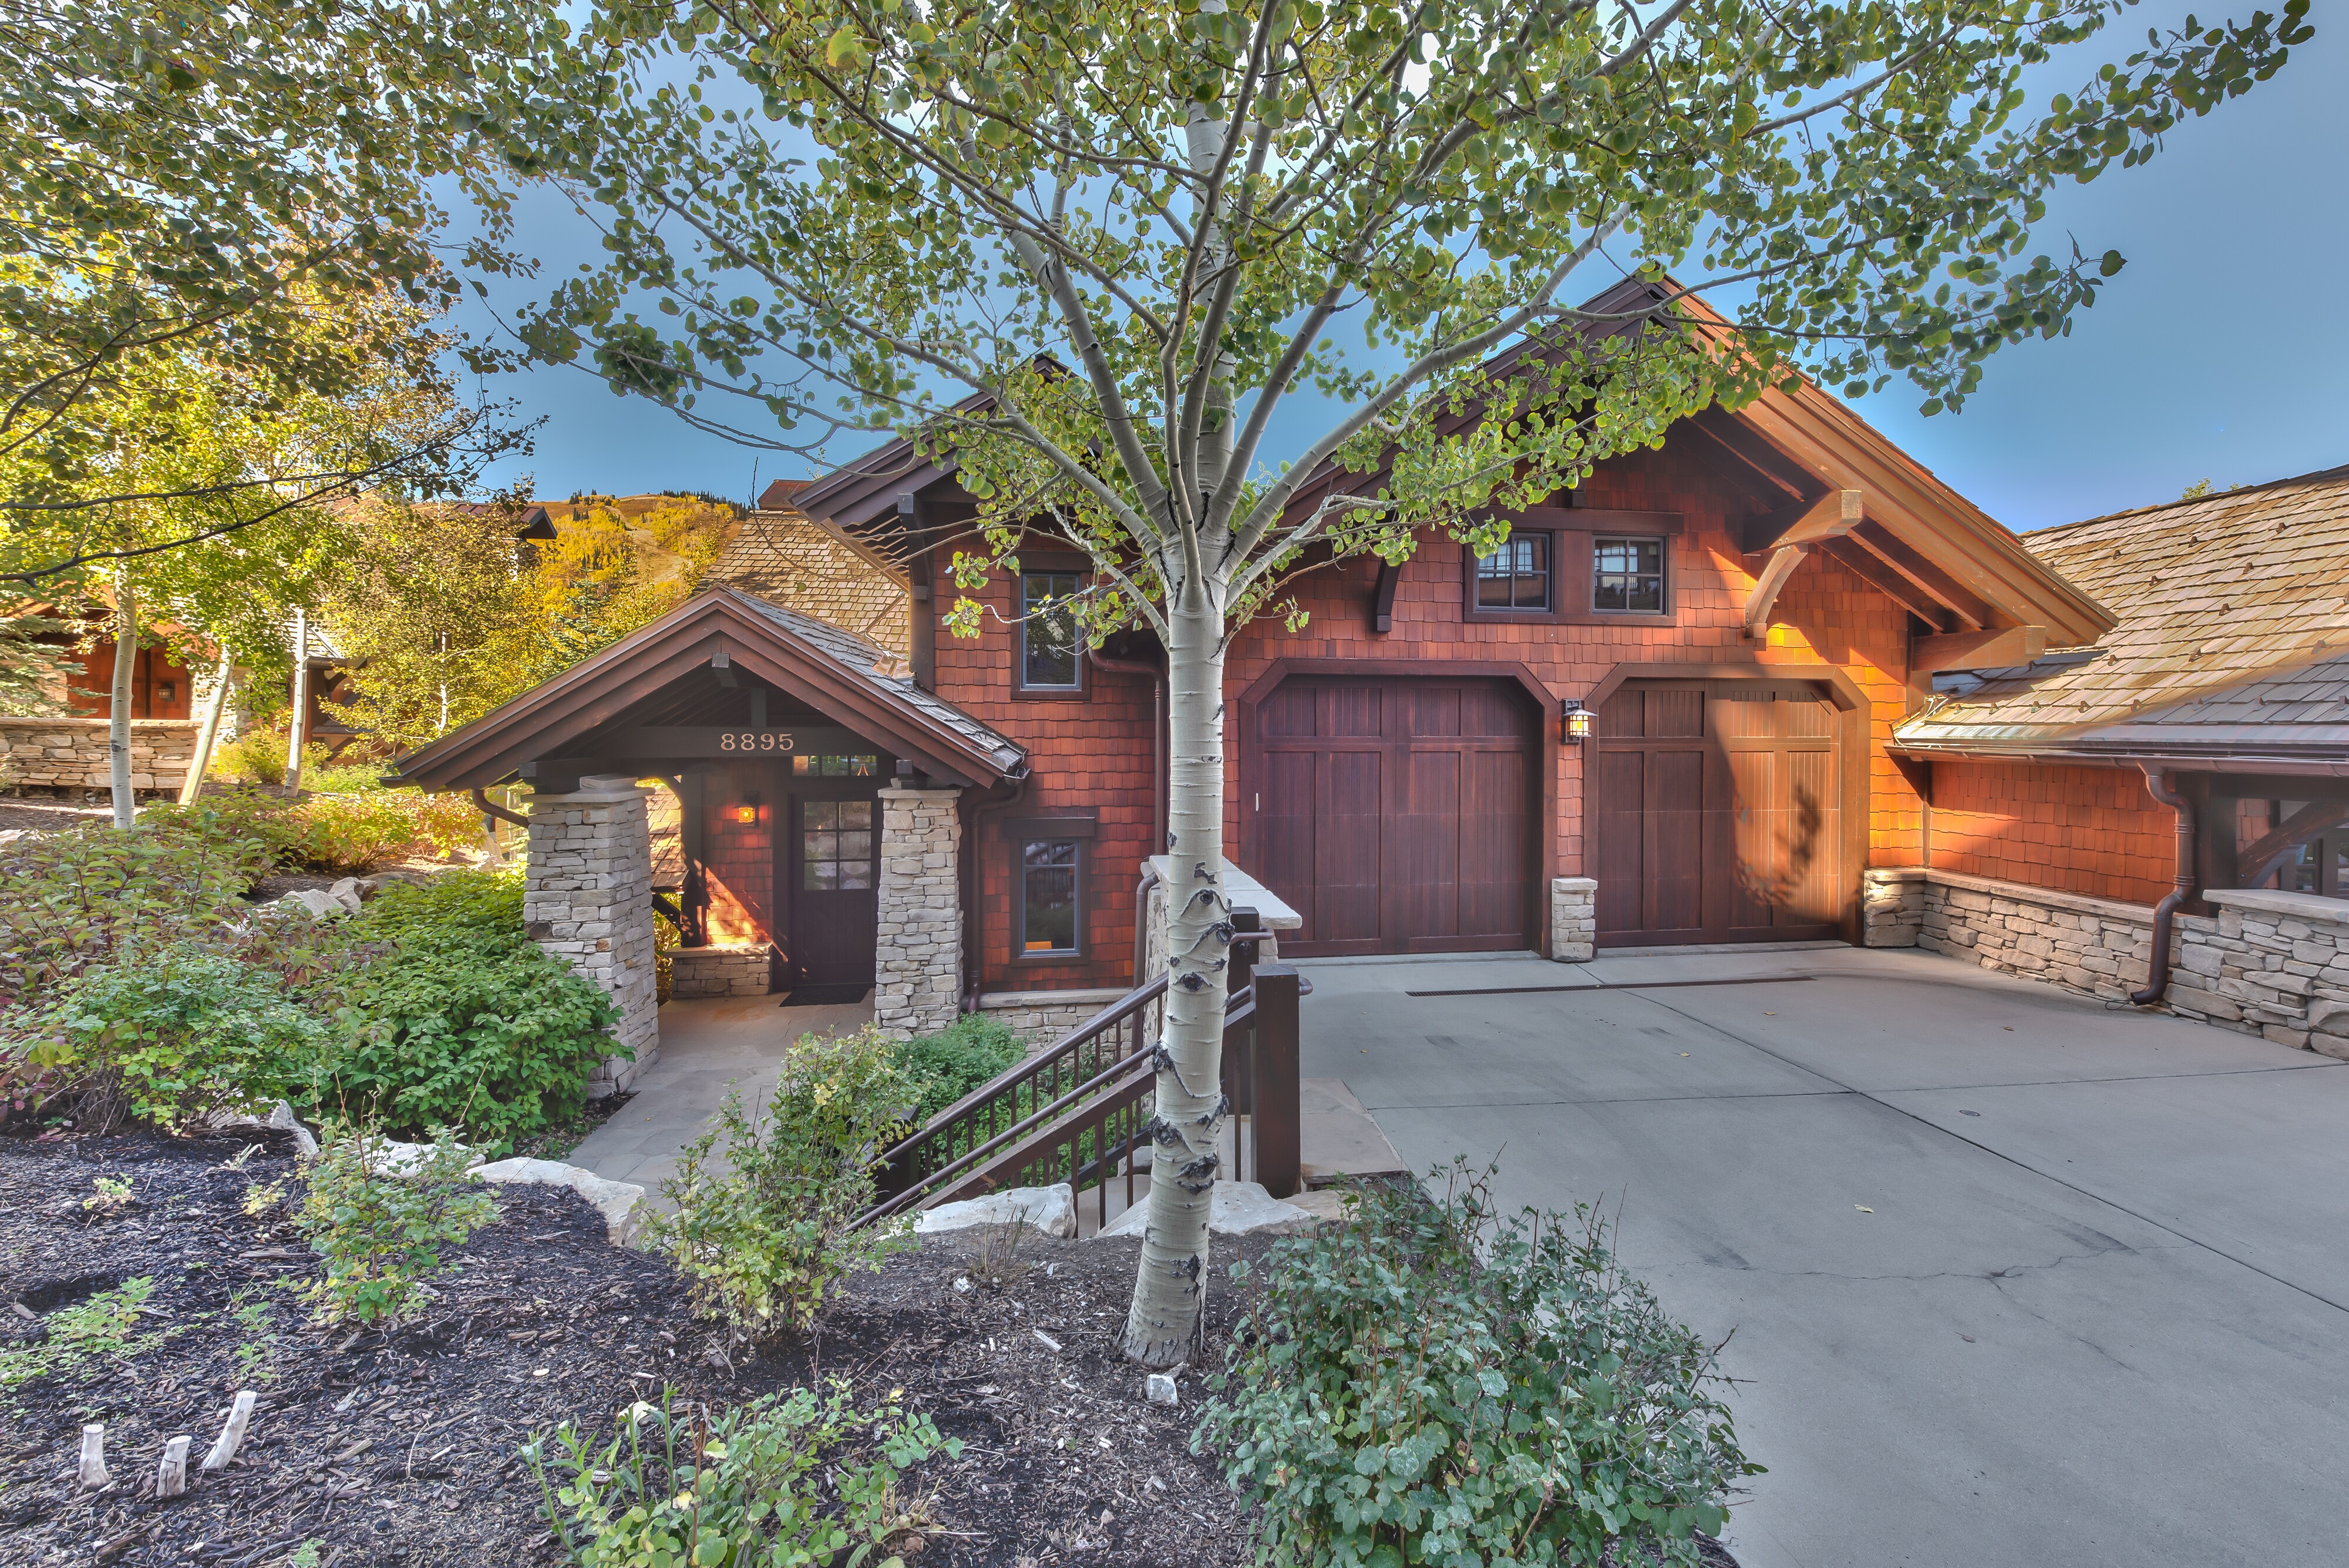 Deer Valley Larkspur Lodge - 4 Bedrooms All with Private Bath